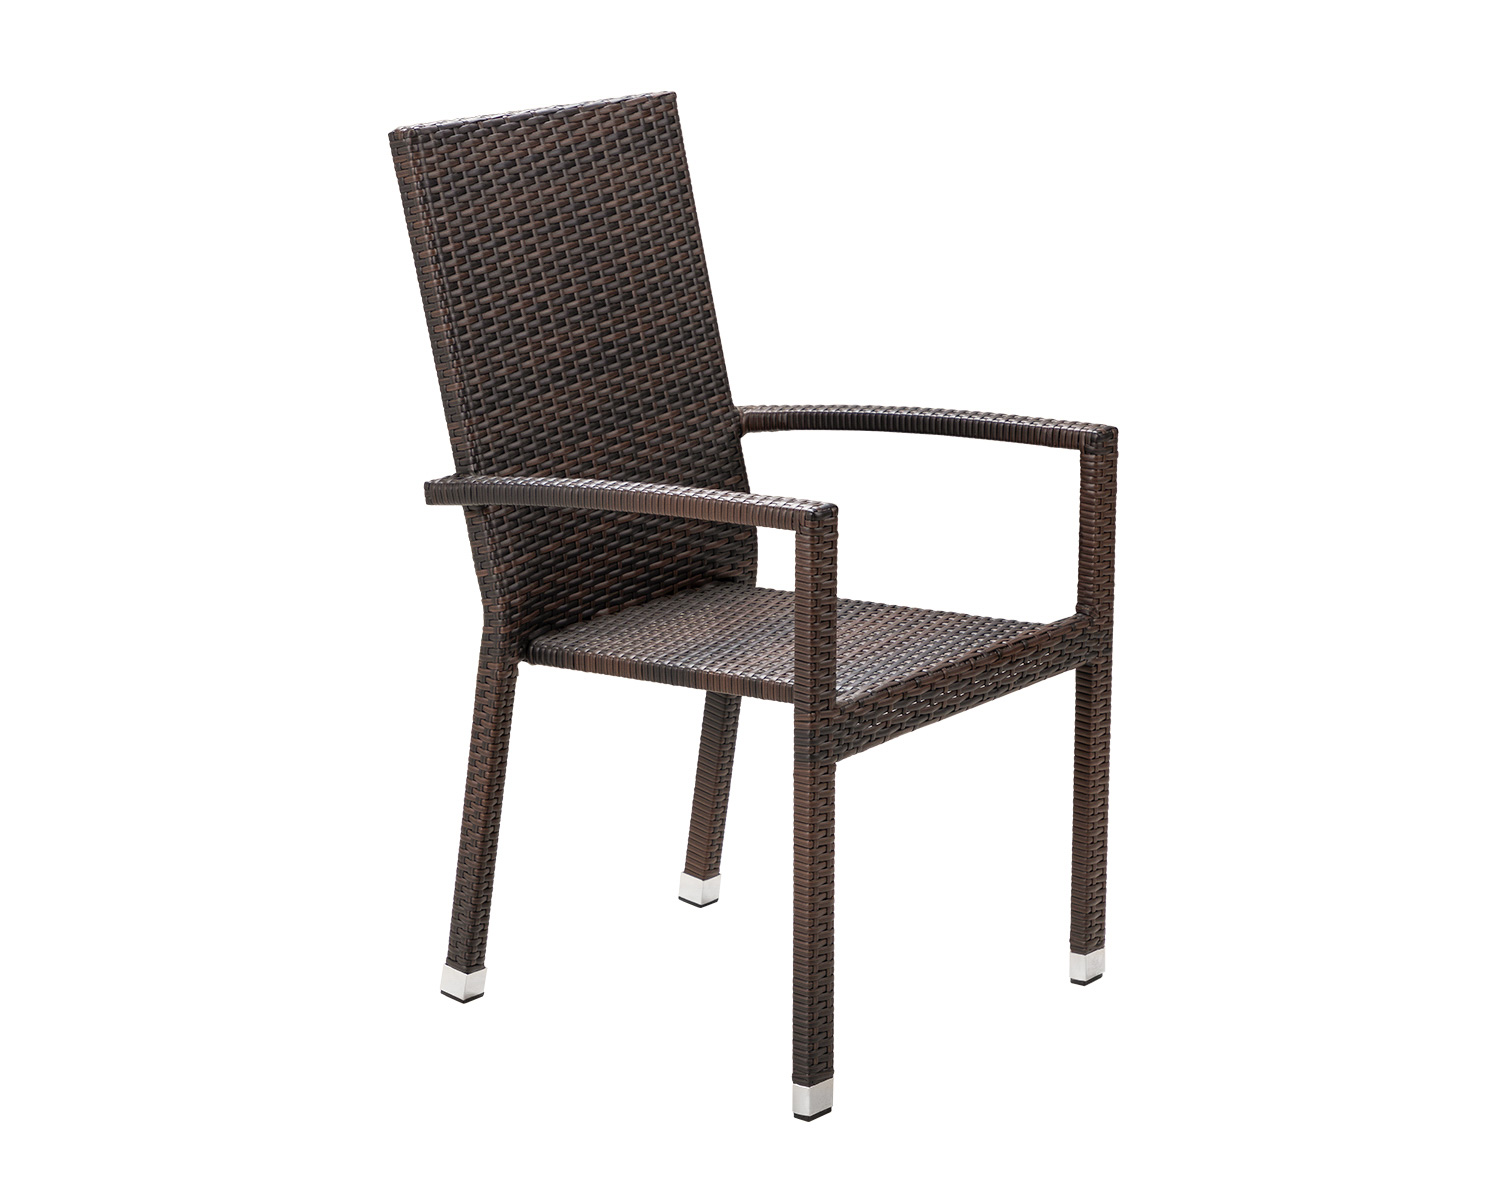 Rio Armed Stacking Rattan Garden Chair In Brown